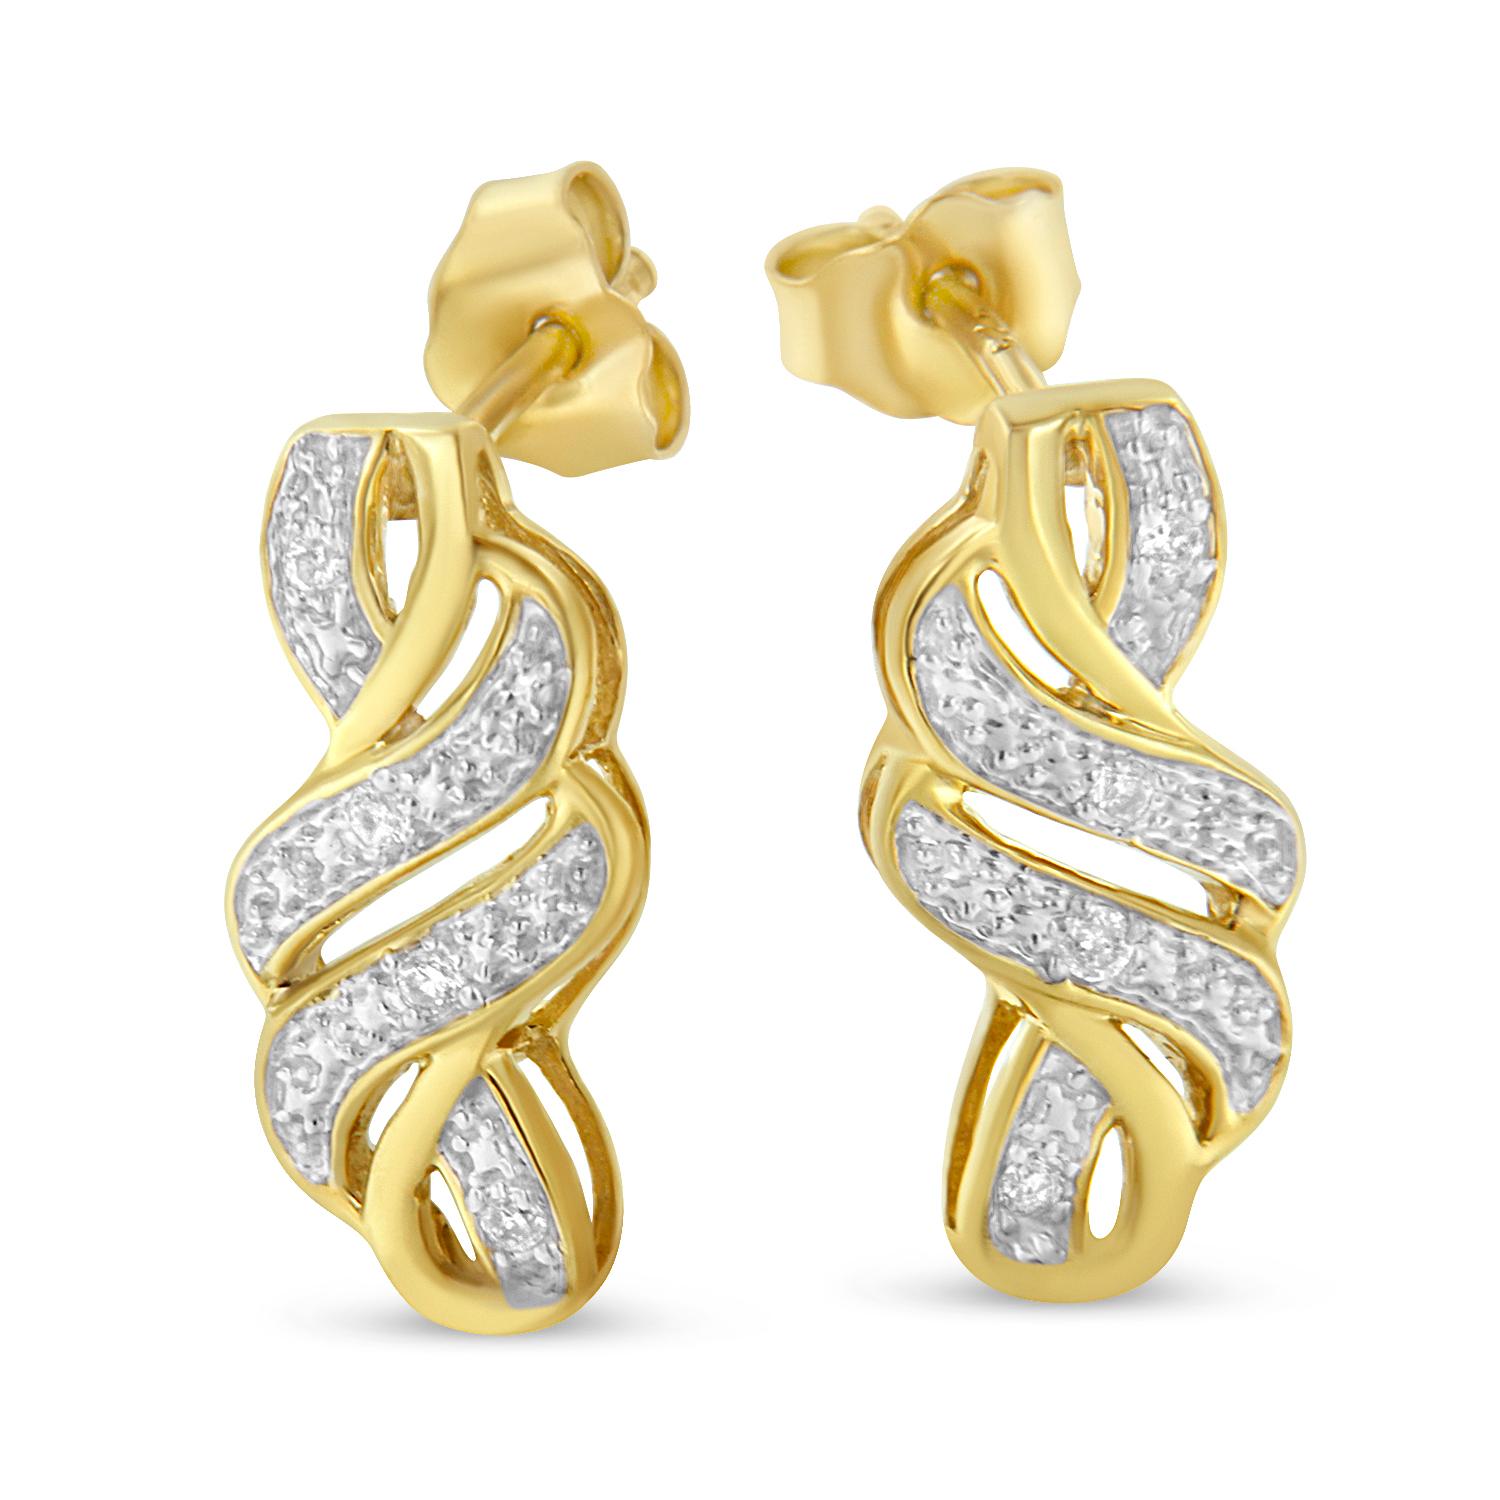 Contemporary Yellow Gold Plated Sterling Silver 1/10 Carat Diamond Swirl Earrings For Sale